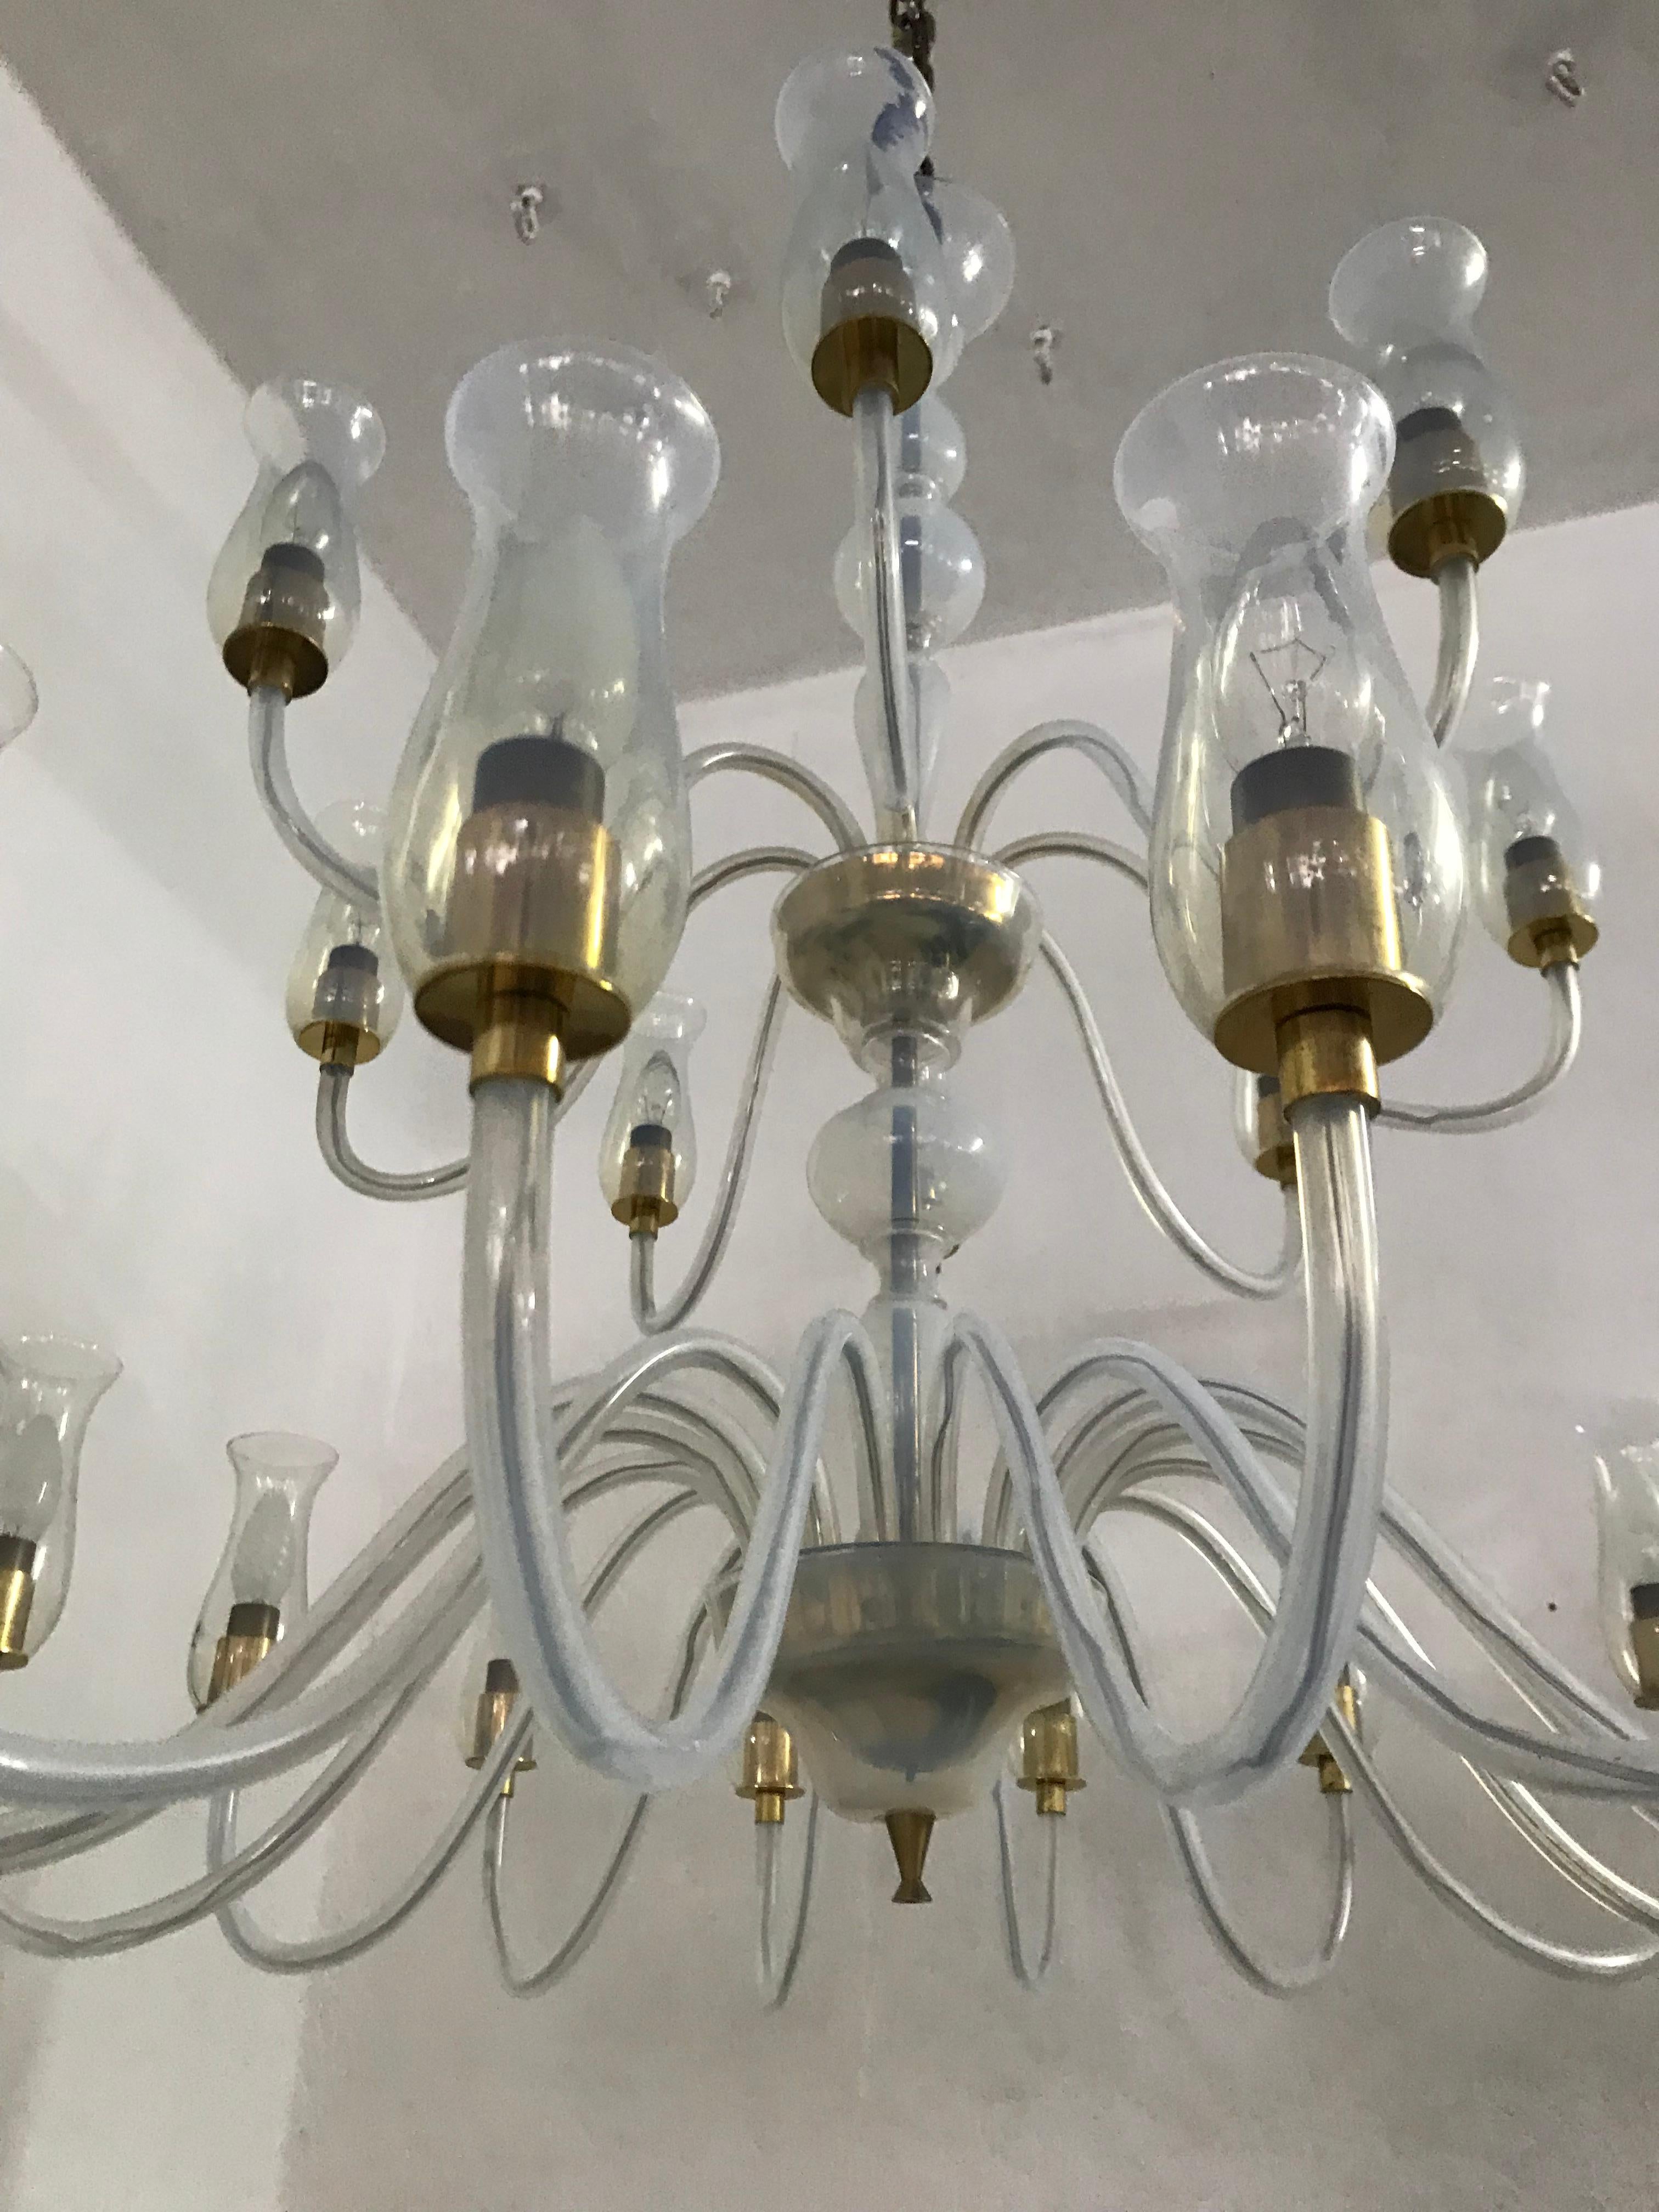 24-Light Mid Century Modern Chandelier by Cenedese in Murano Glass, circa 1970 For Sale 3